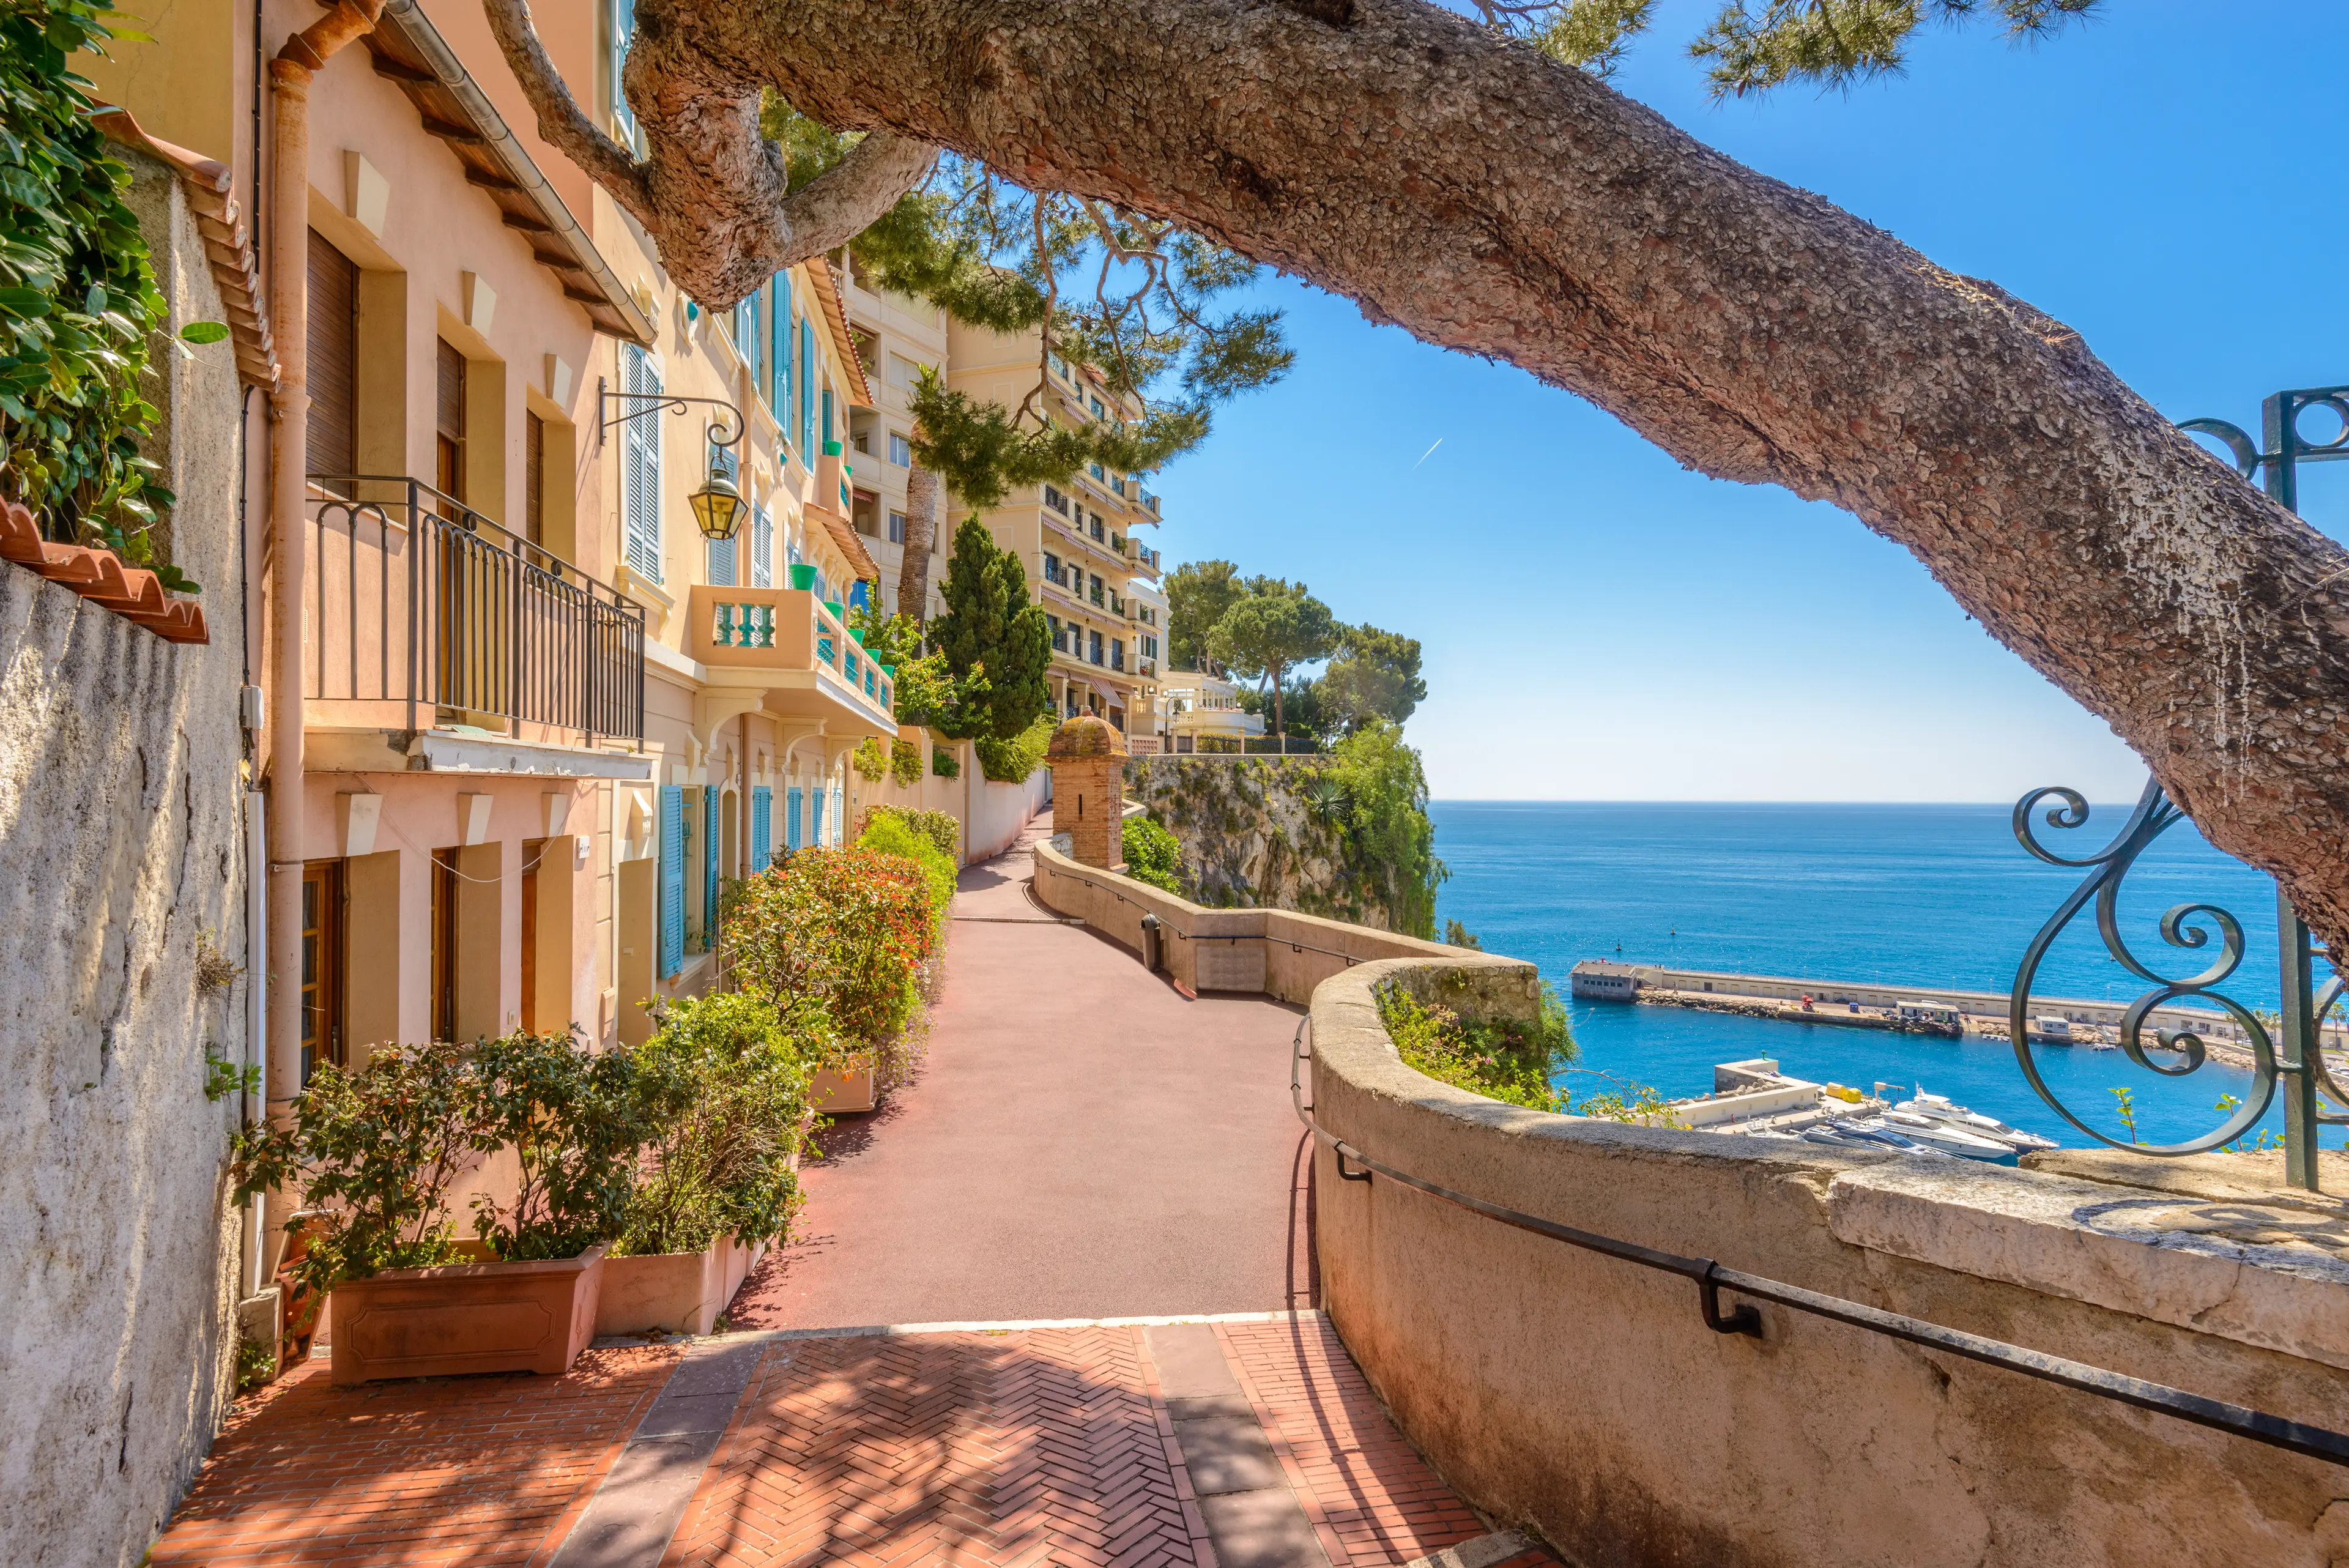 Monaco Family Adventure: 1-Day Offbeat Outdoors & Relaxation Itinerary